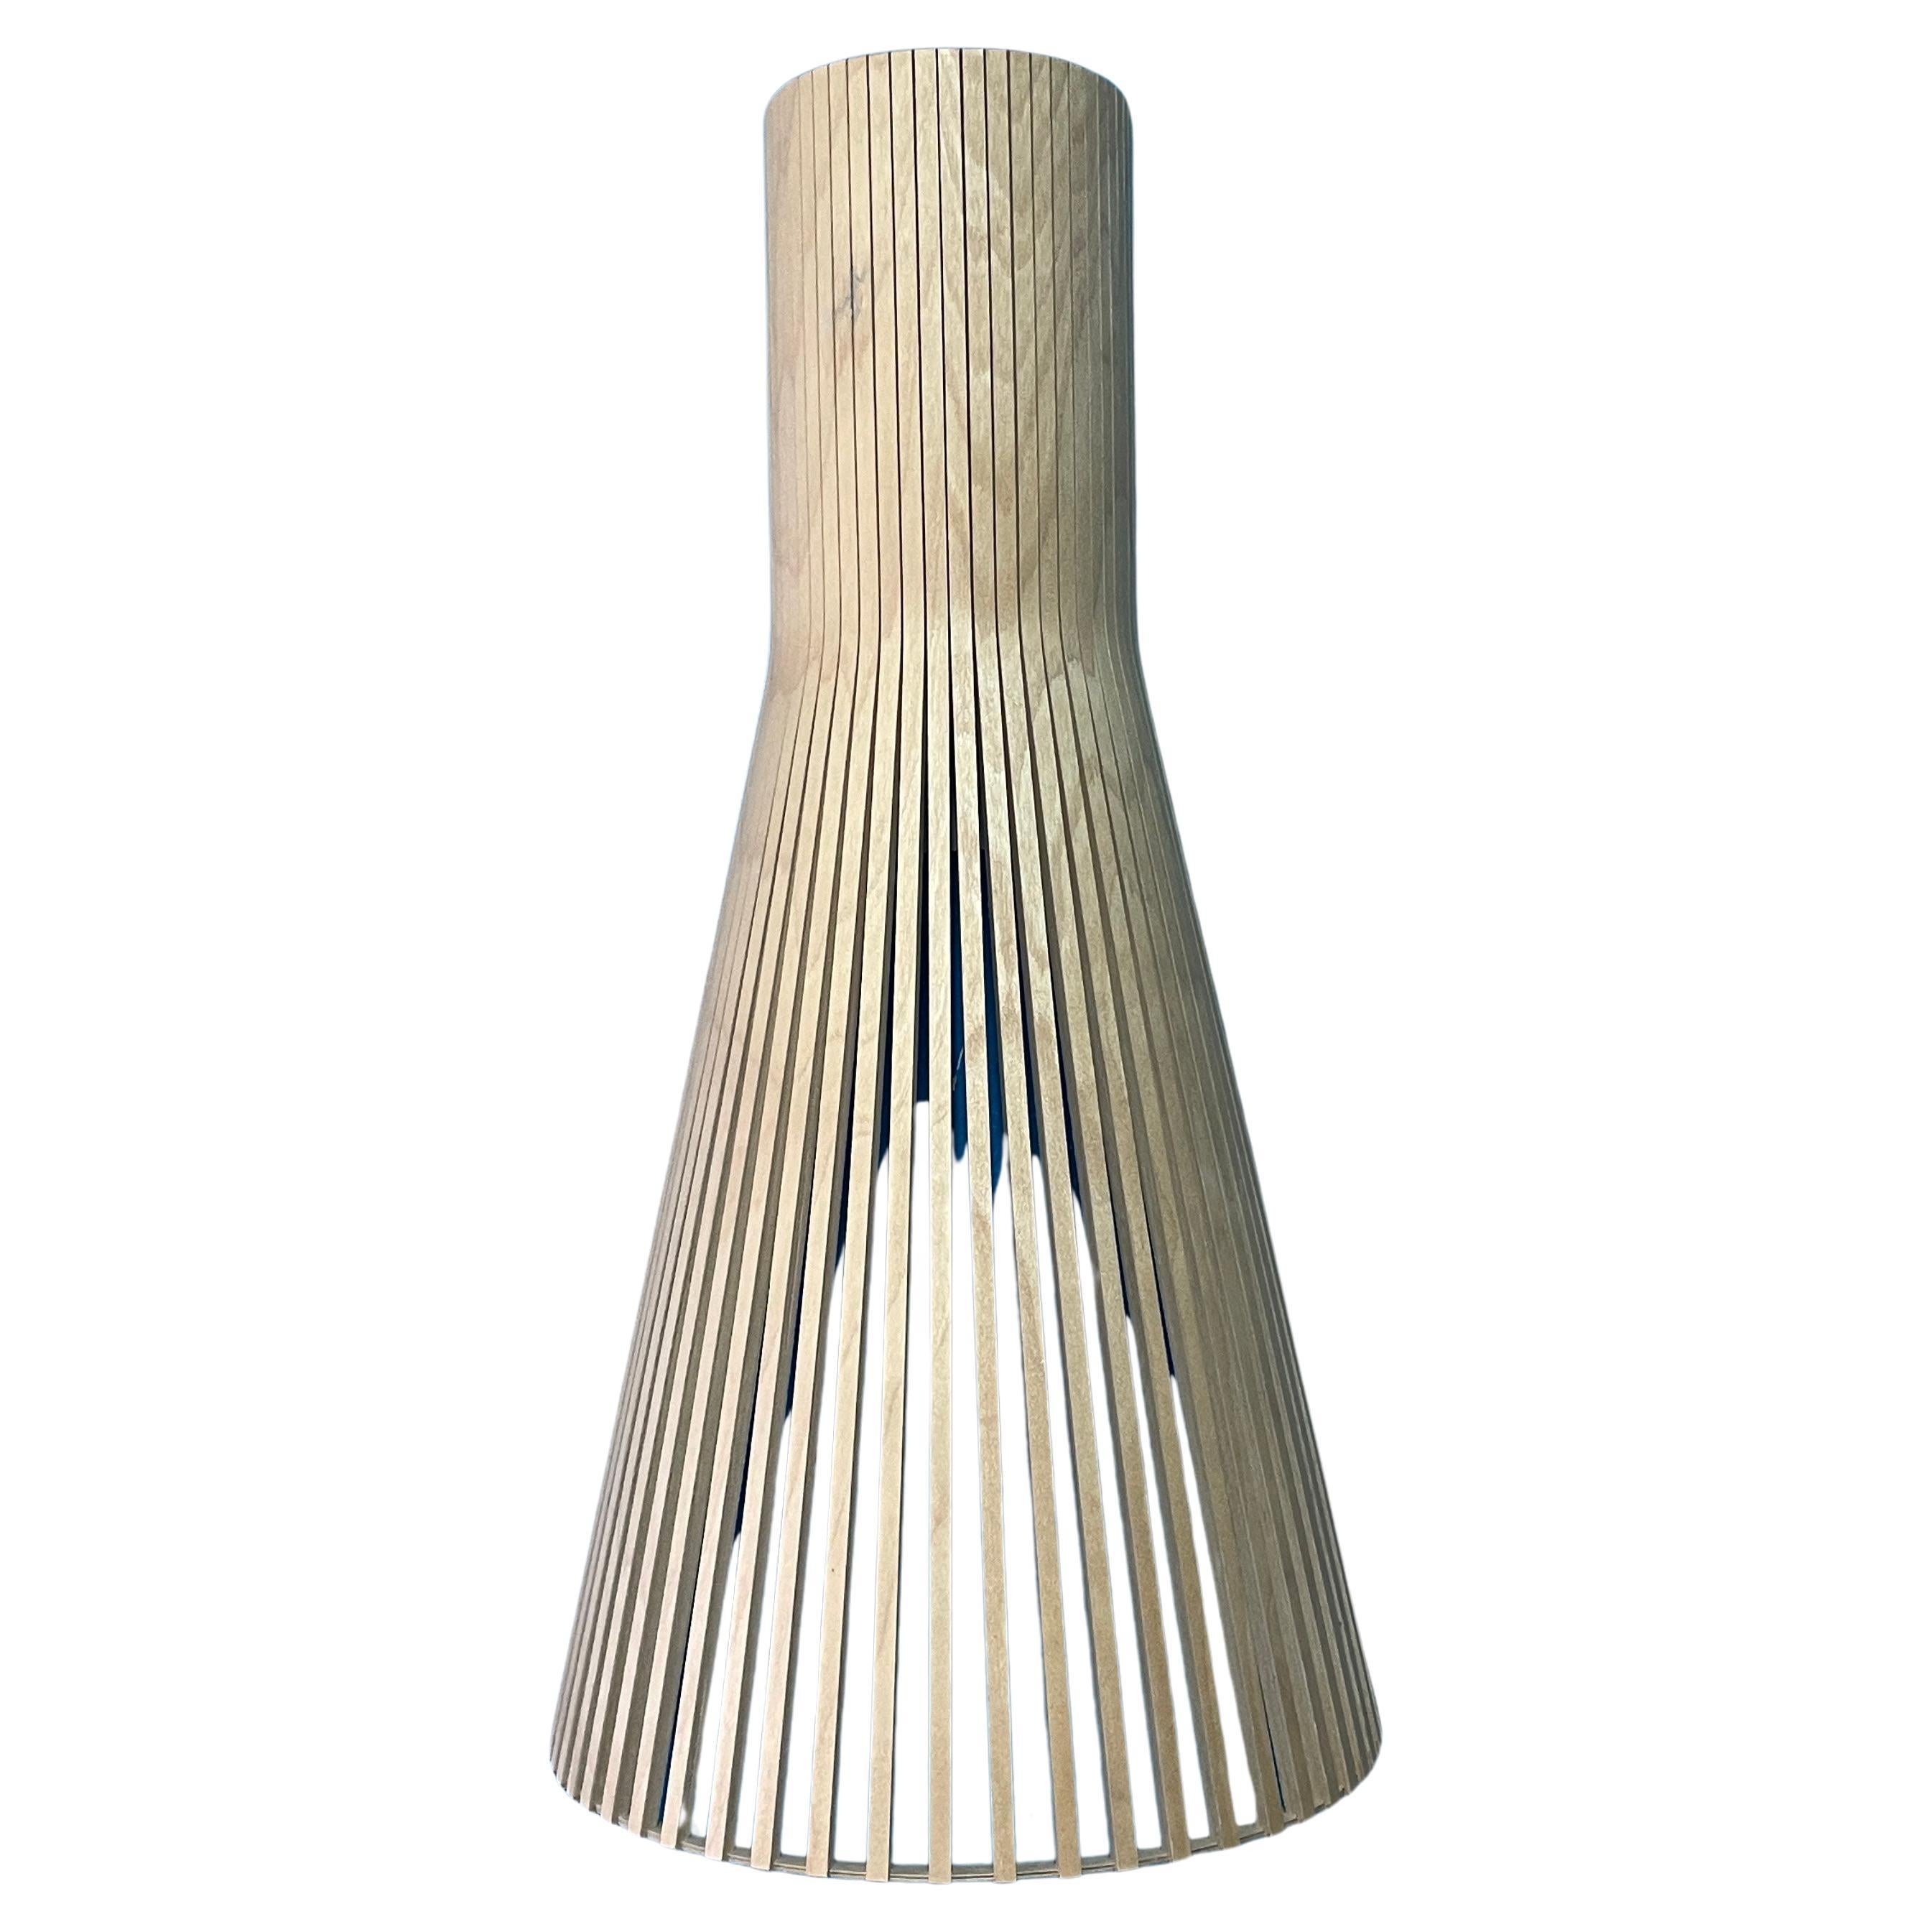 Wooden Secto 4230 Wall Lamp by Secto Design Finland